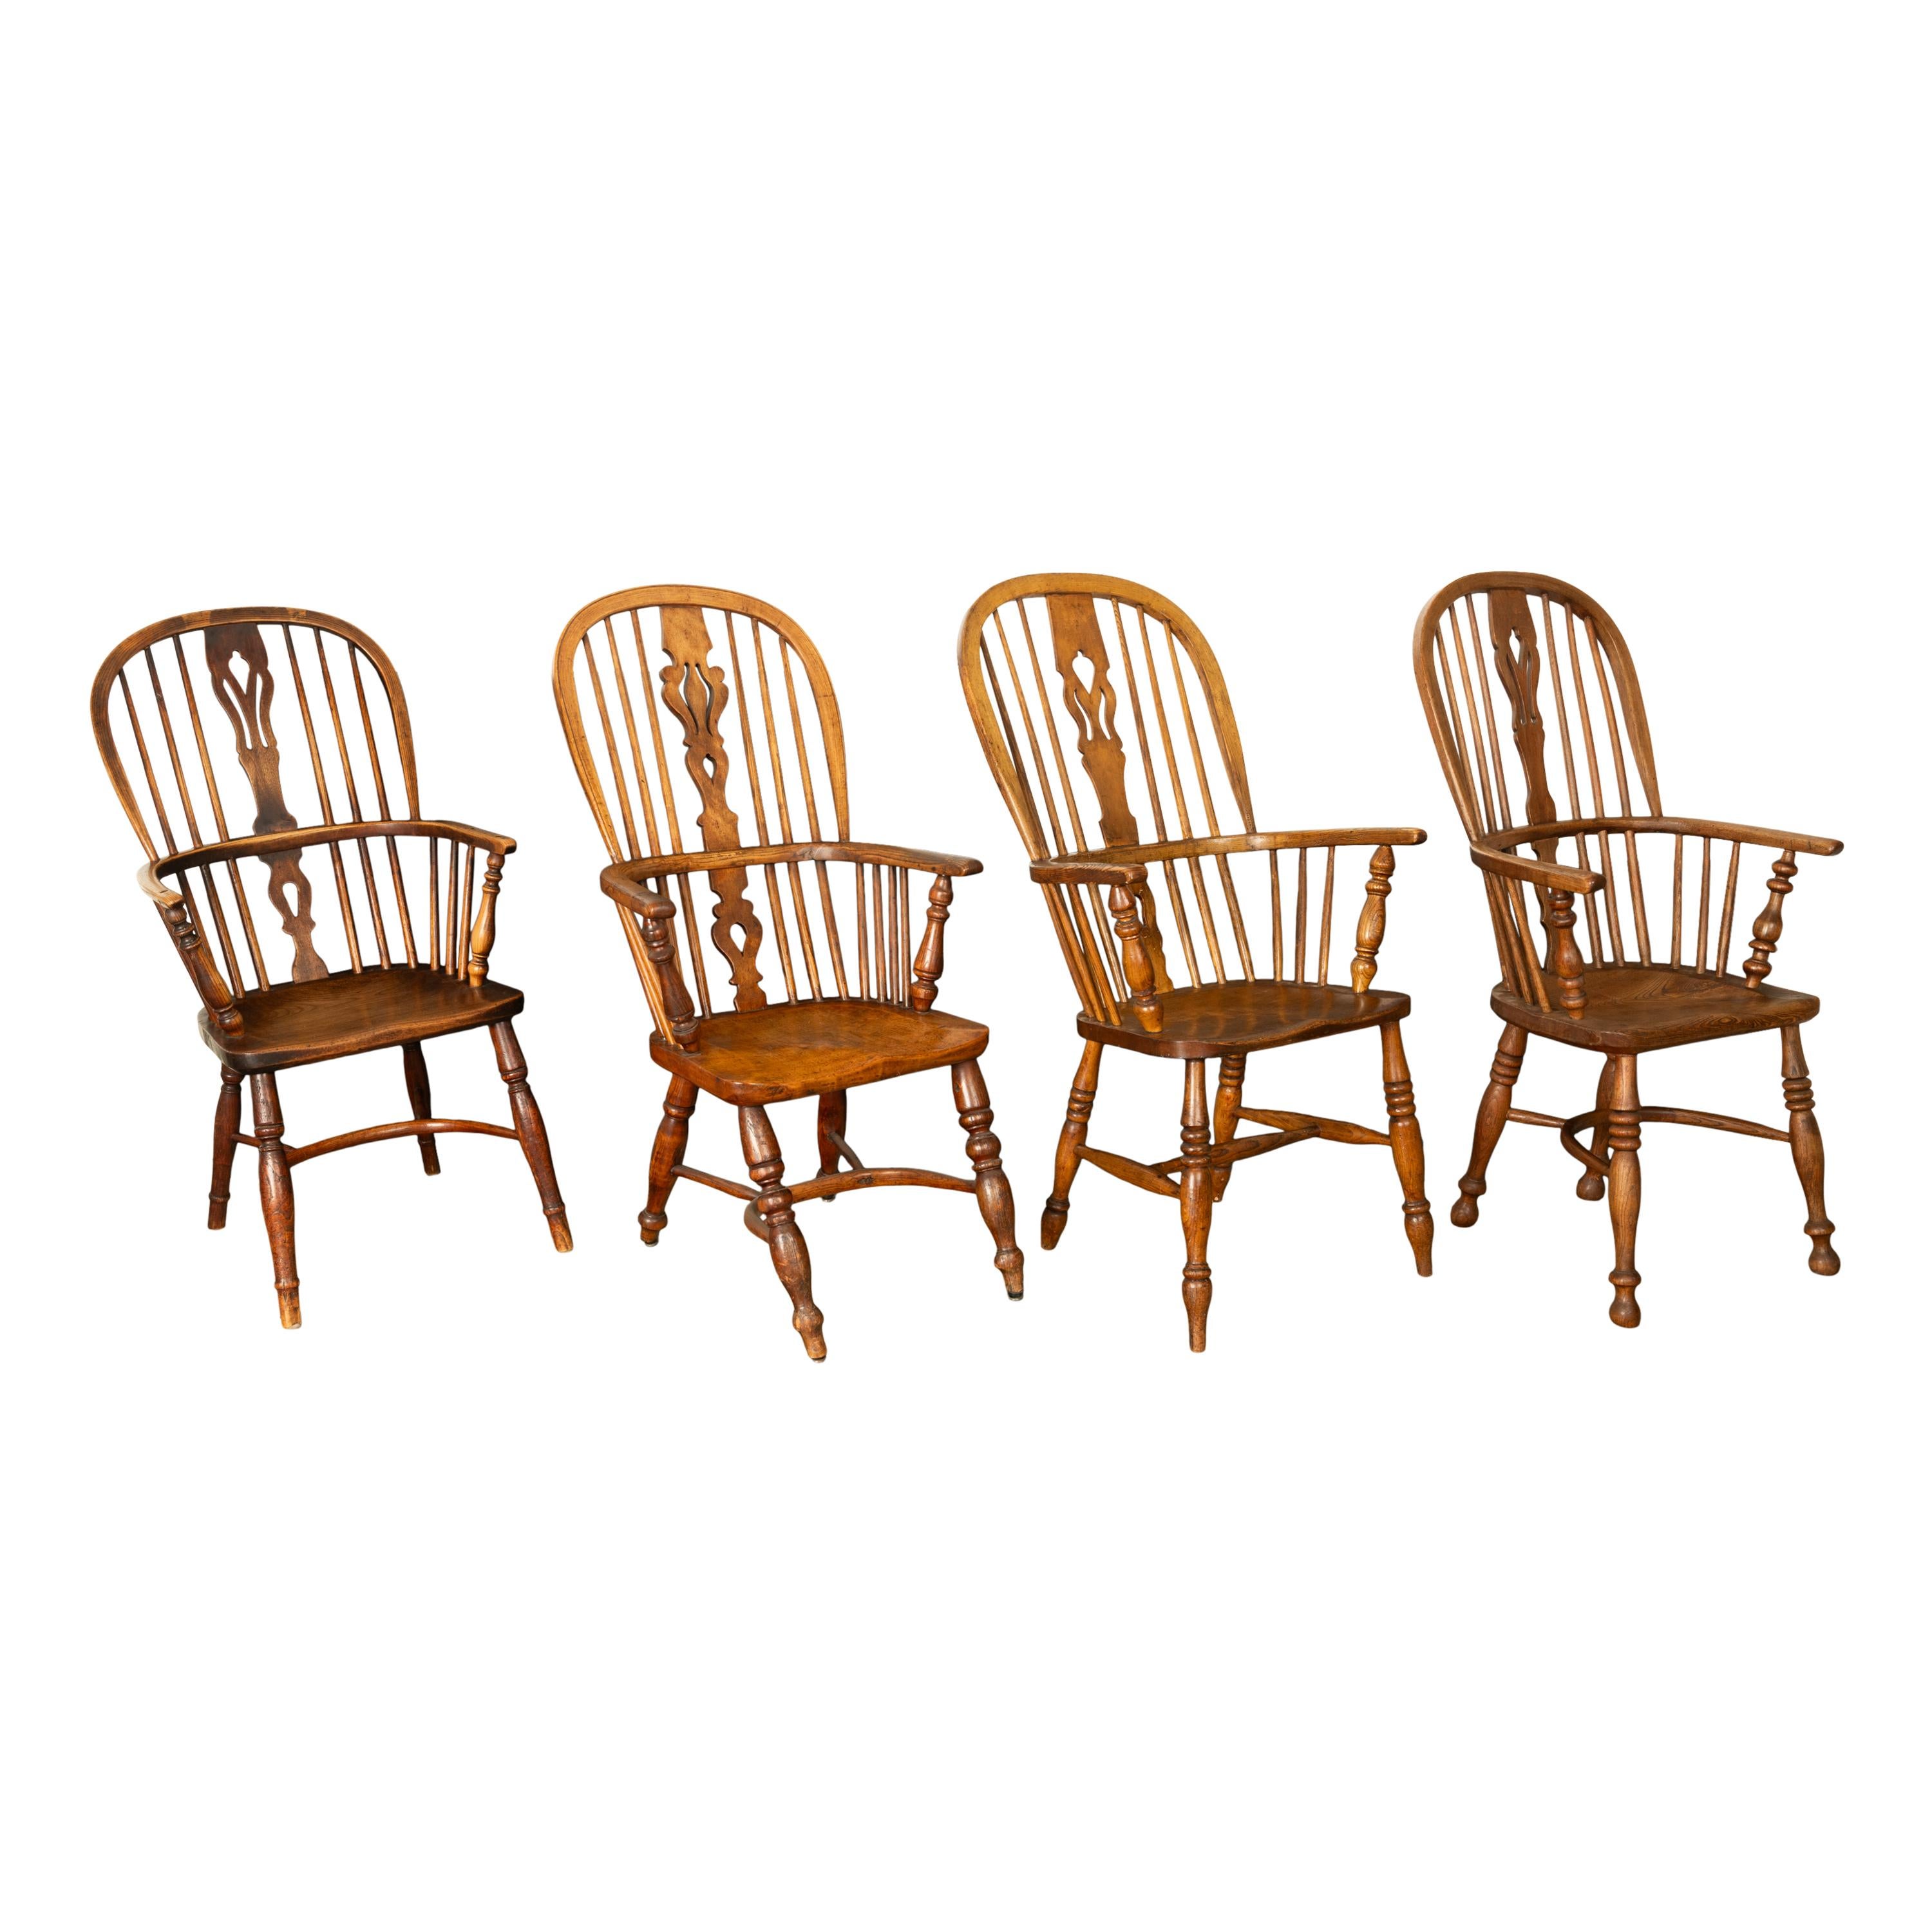 Set 4 Antique 19thC High-backed English Ash Elm Country Windsor Arm Chairs 1840  For Sale 10